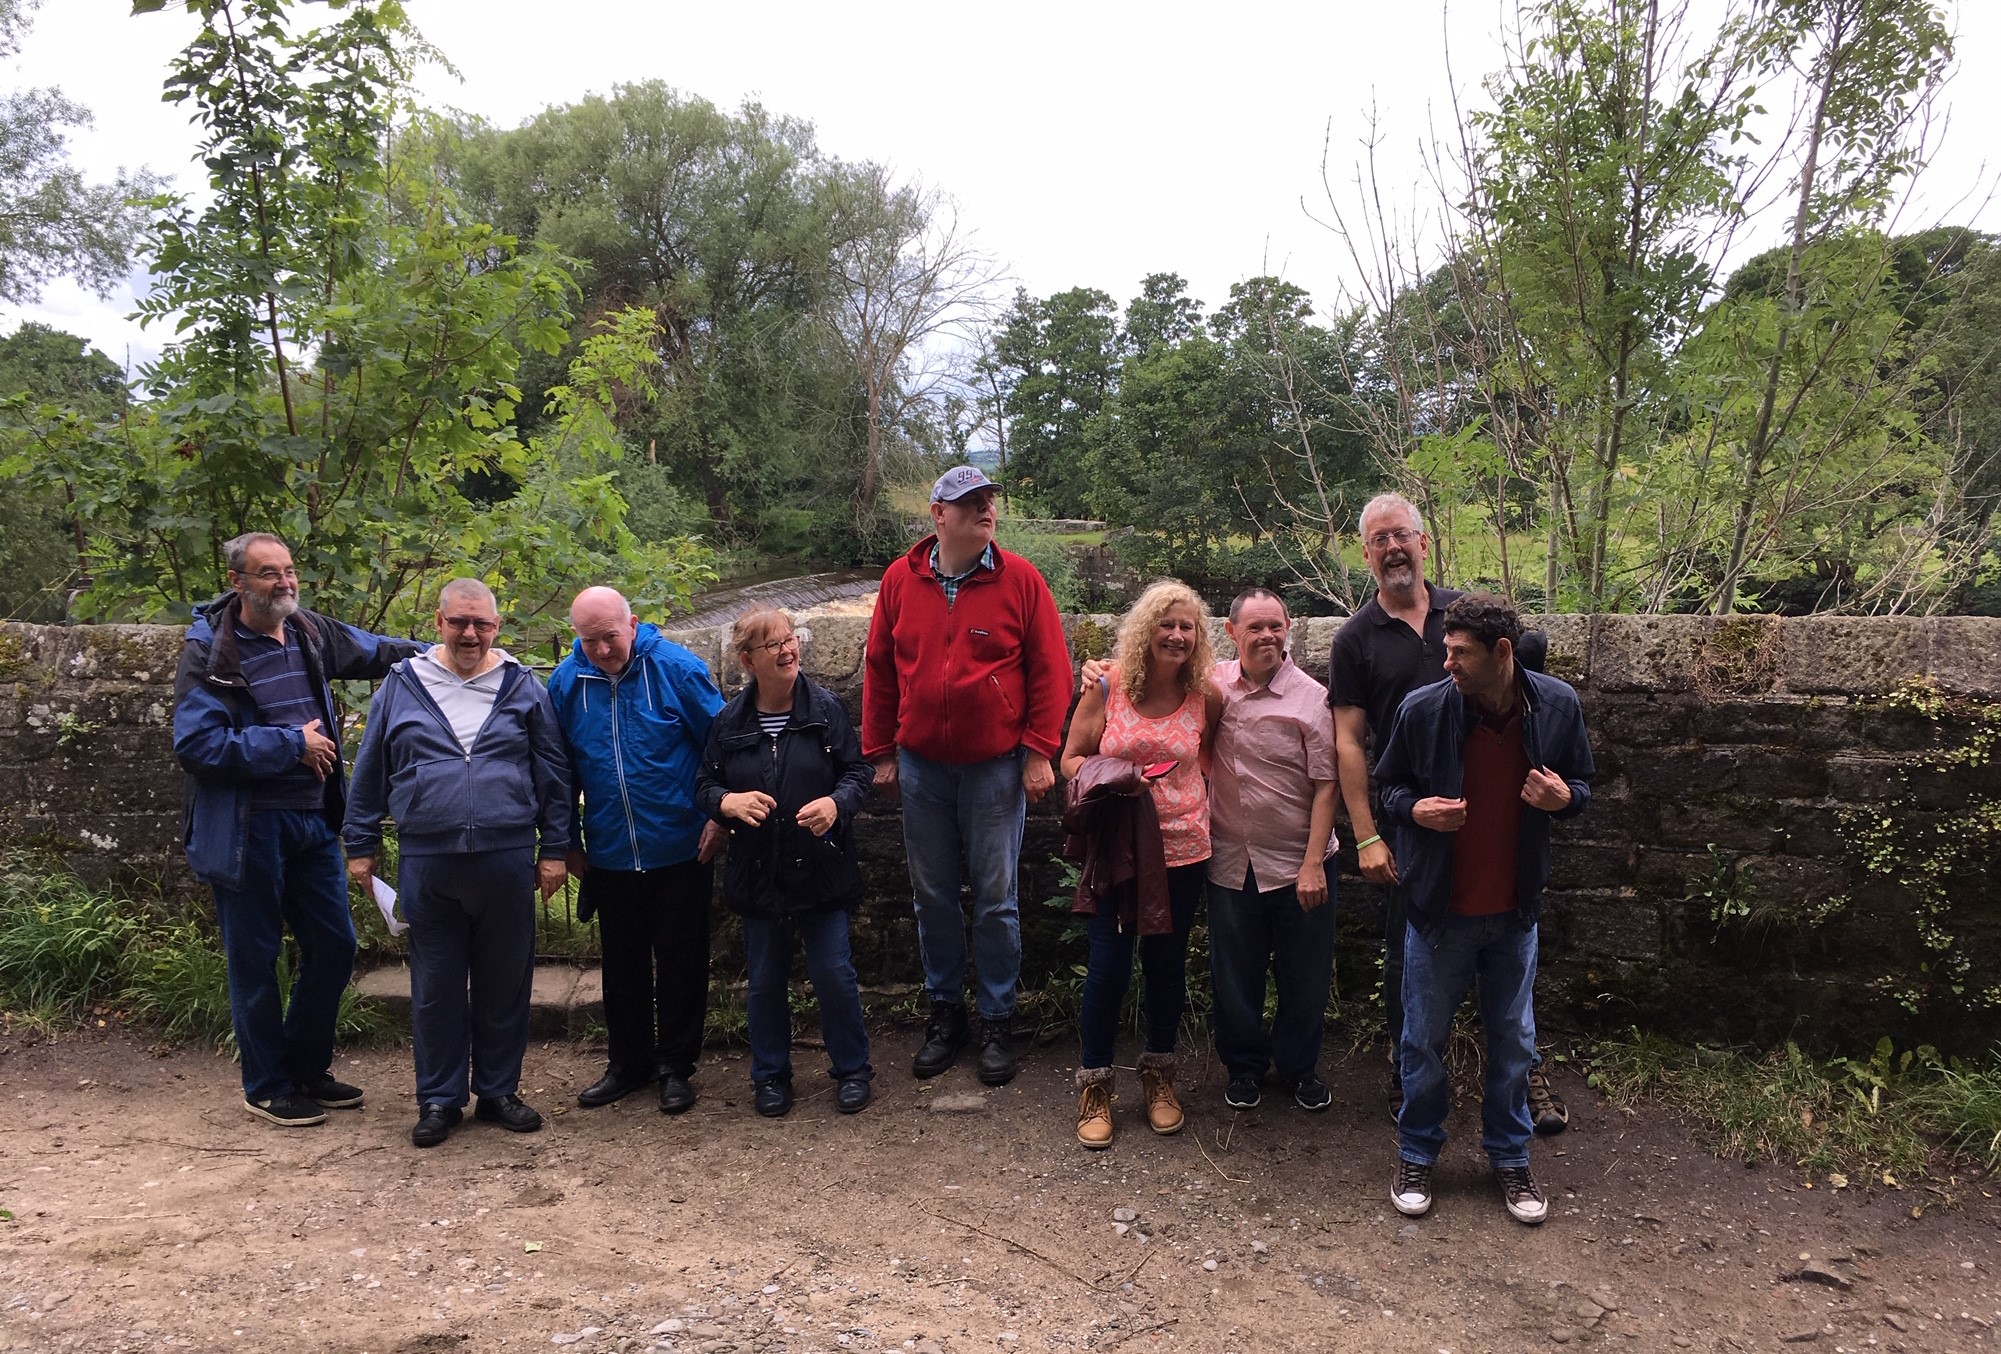 A group of people standing by a stone wall with trees behind.